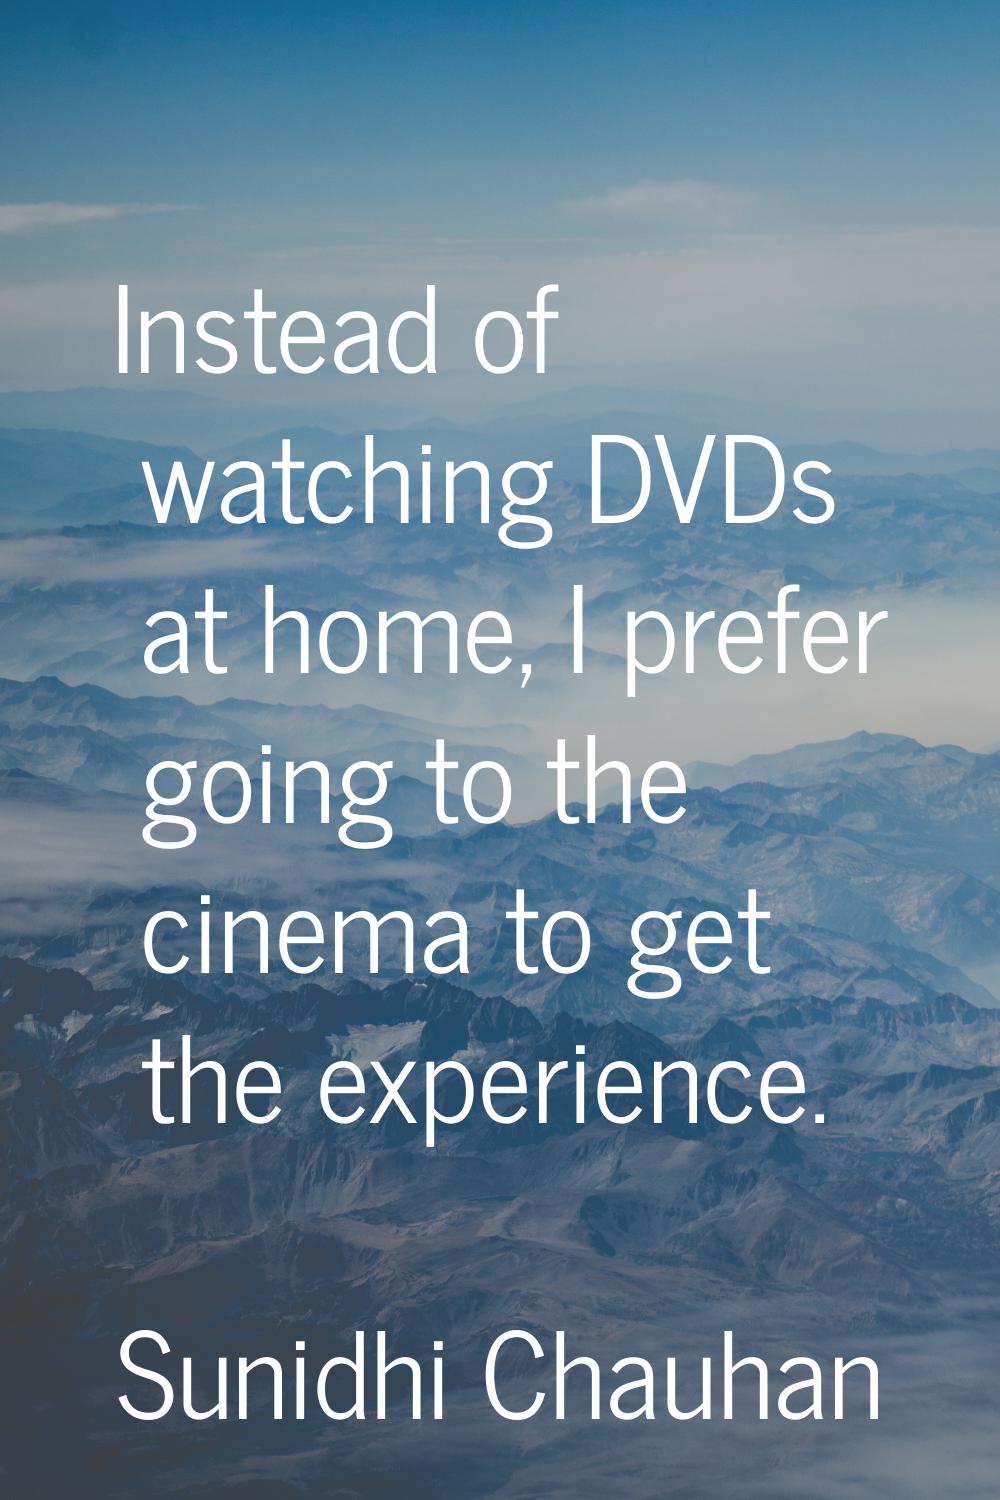 Instead of watching DVDs at home, I prefer going to the cinema to get the experience.